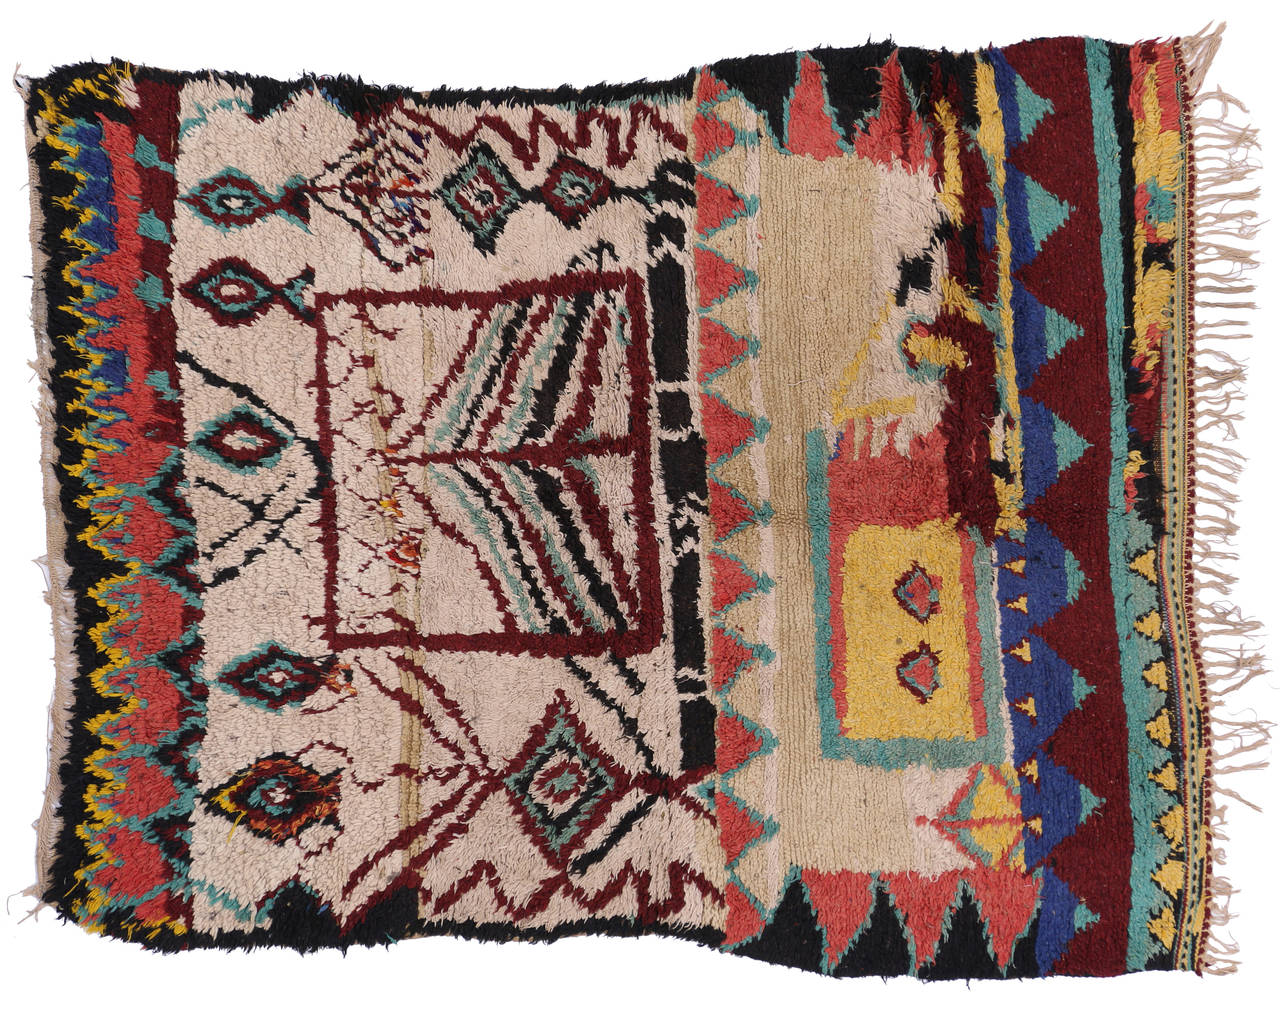 This unique vintage Moroccan Azilal rug has an eclectic design with Navajo colors like maroon, blue, green, red and yellow. Azilal rugs with their sumptuous texture and sturdy weave make them an ideal statement rug for any room. The Berber women,